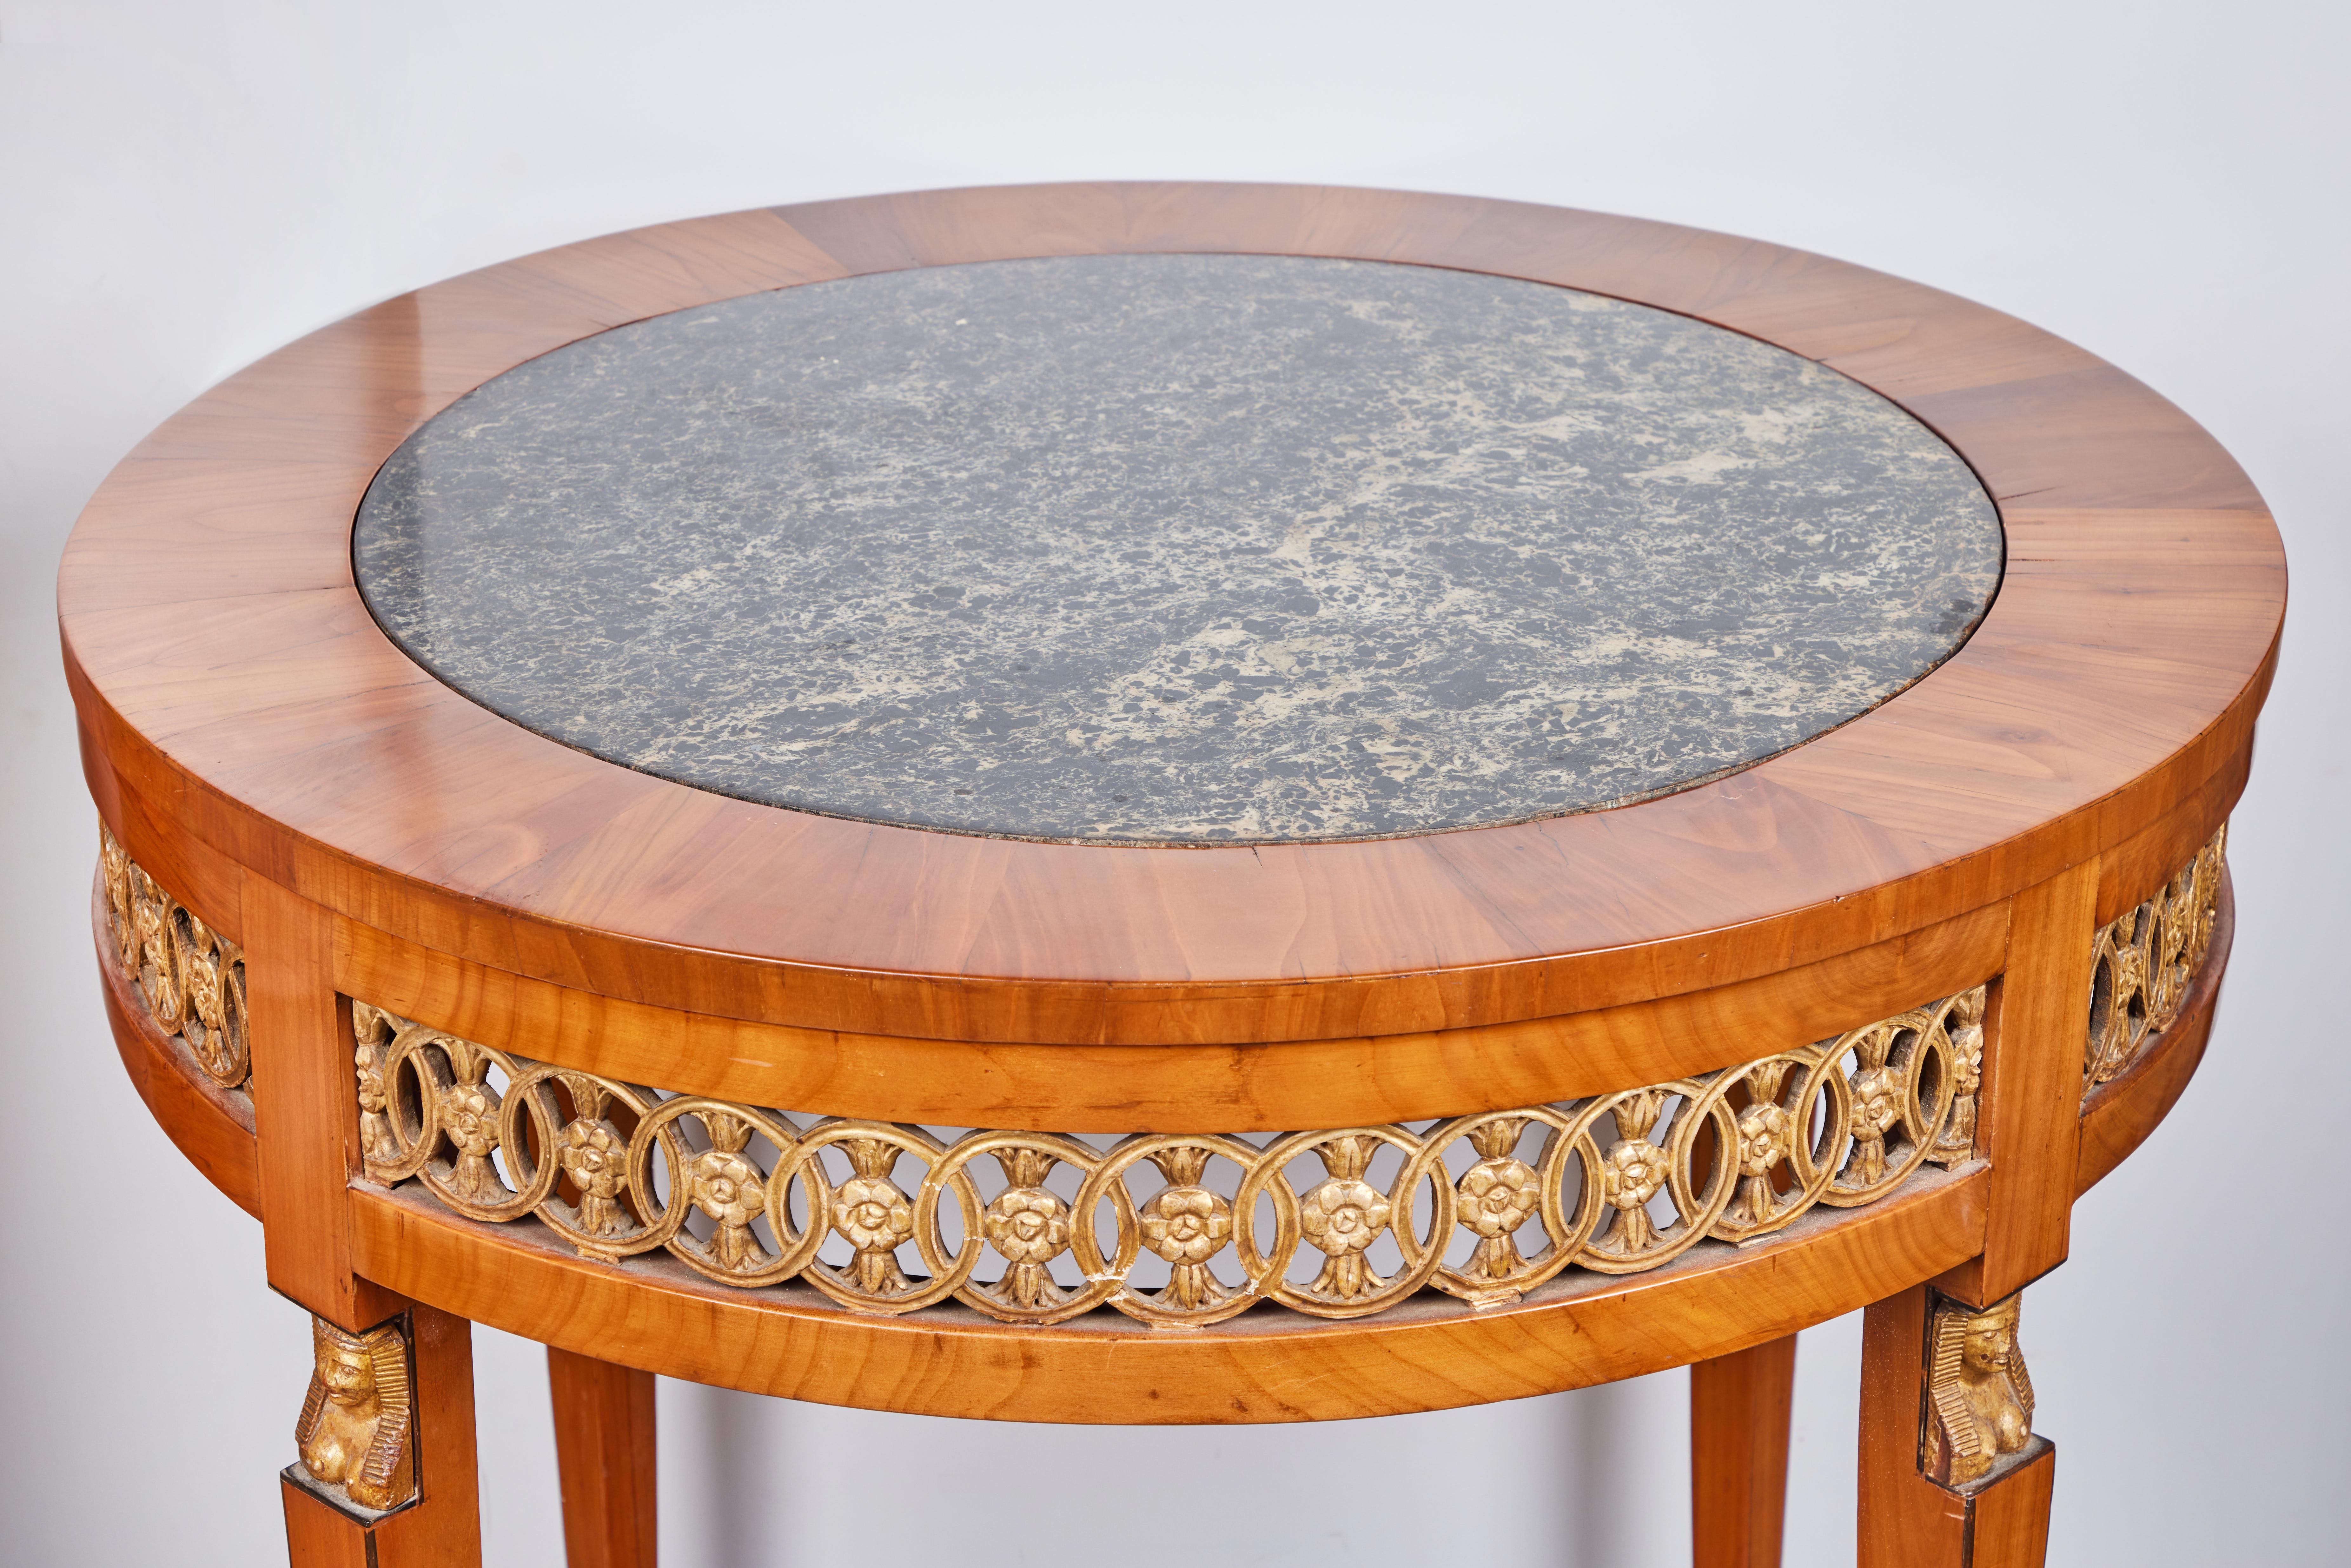 Fruitwood Table with Inlaid Marble In Good Condition For Sale In Newport Beach, CA